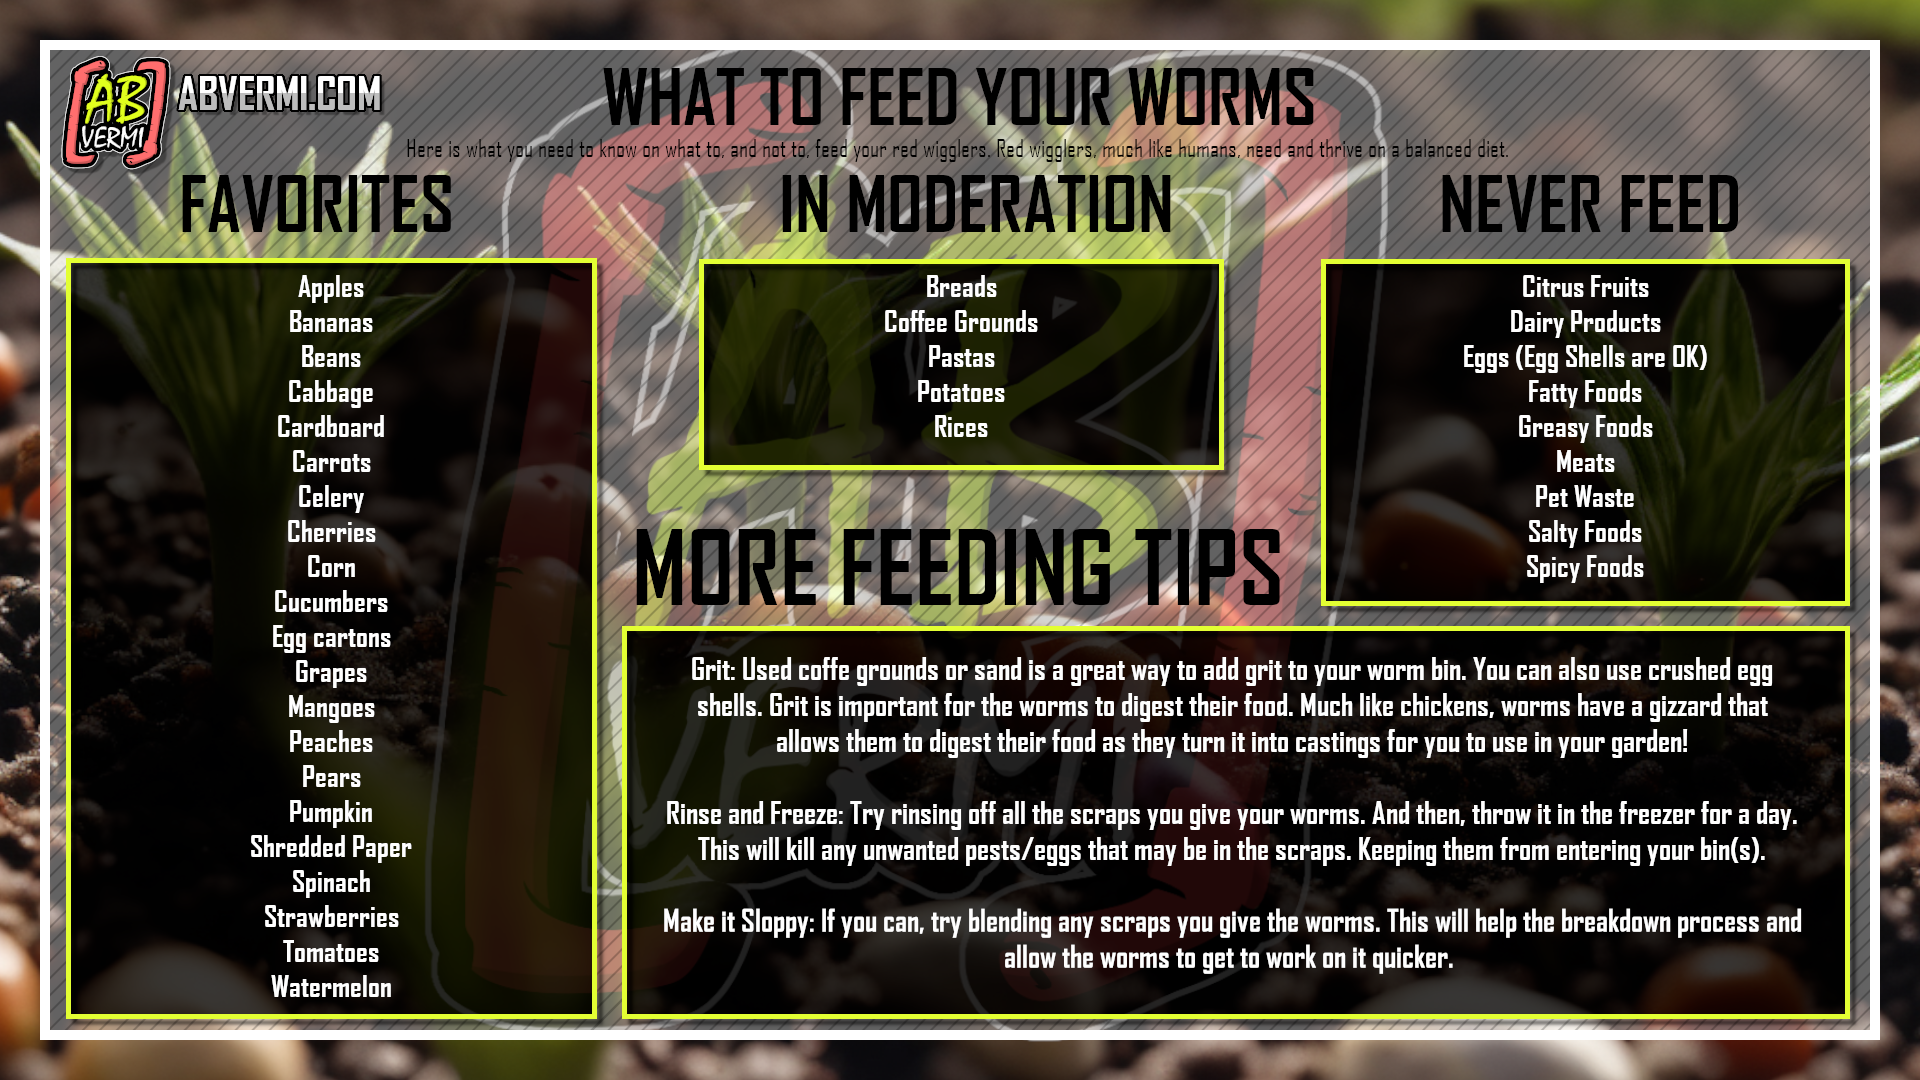 Feeding Guide for your worms. Showing what is a worms favorite food, what you should feed in moderation, and what you should NEVER feed. As well as other feeding tips.